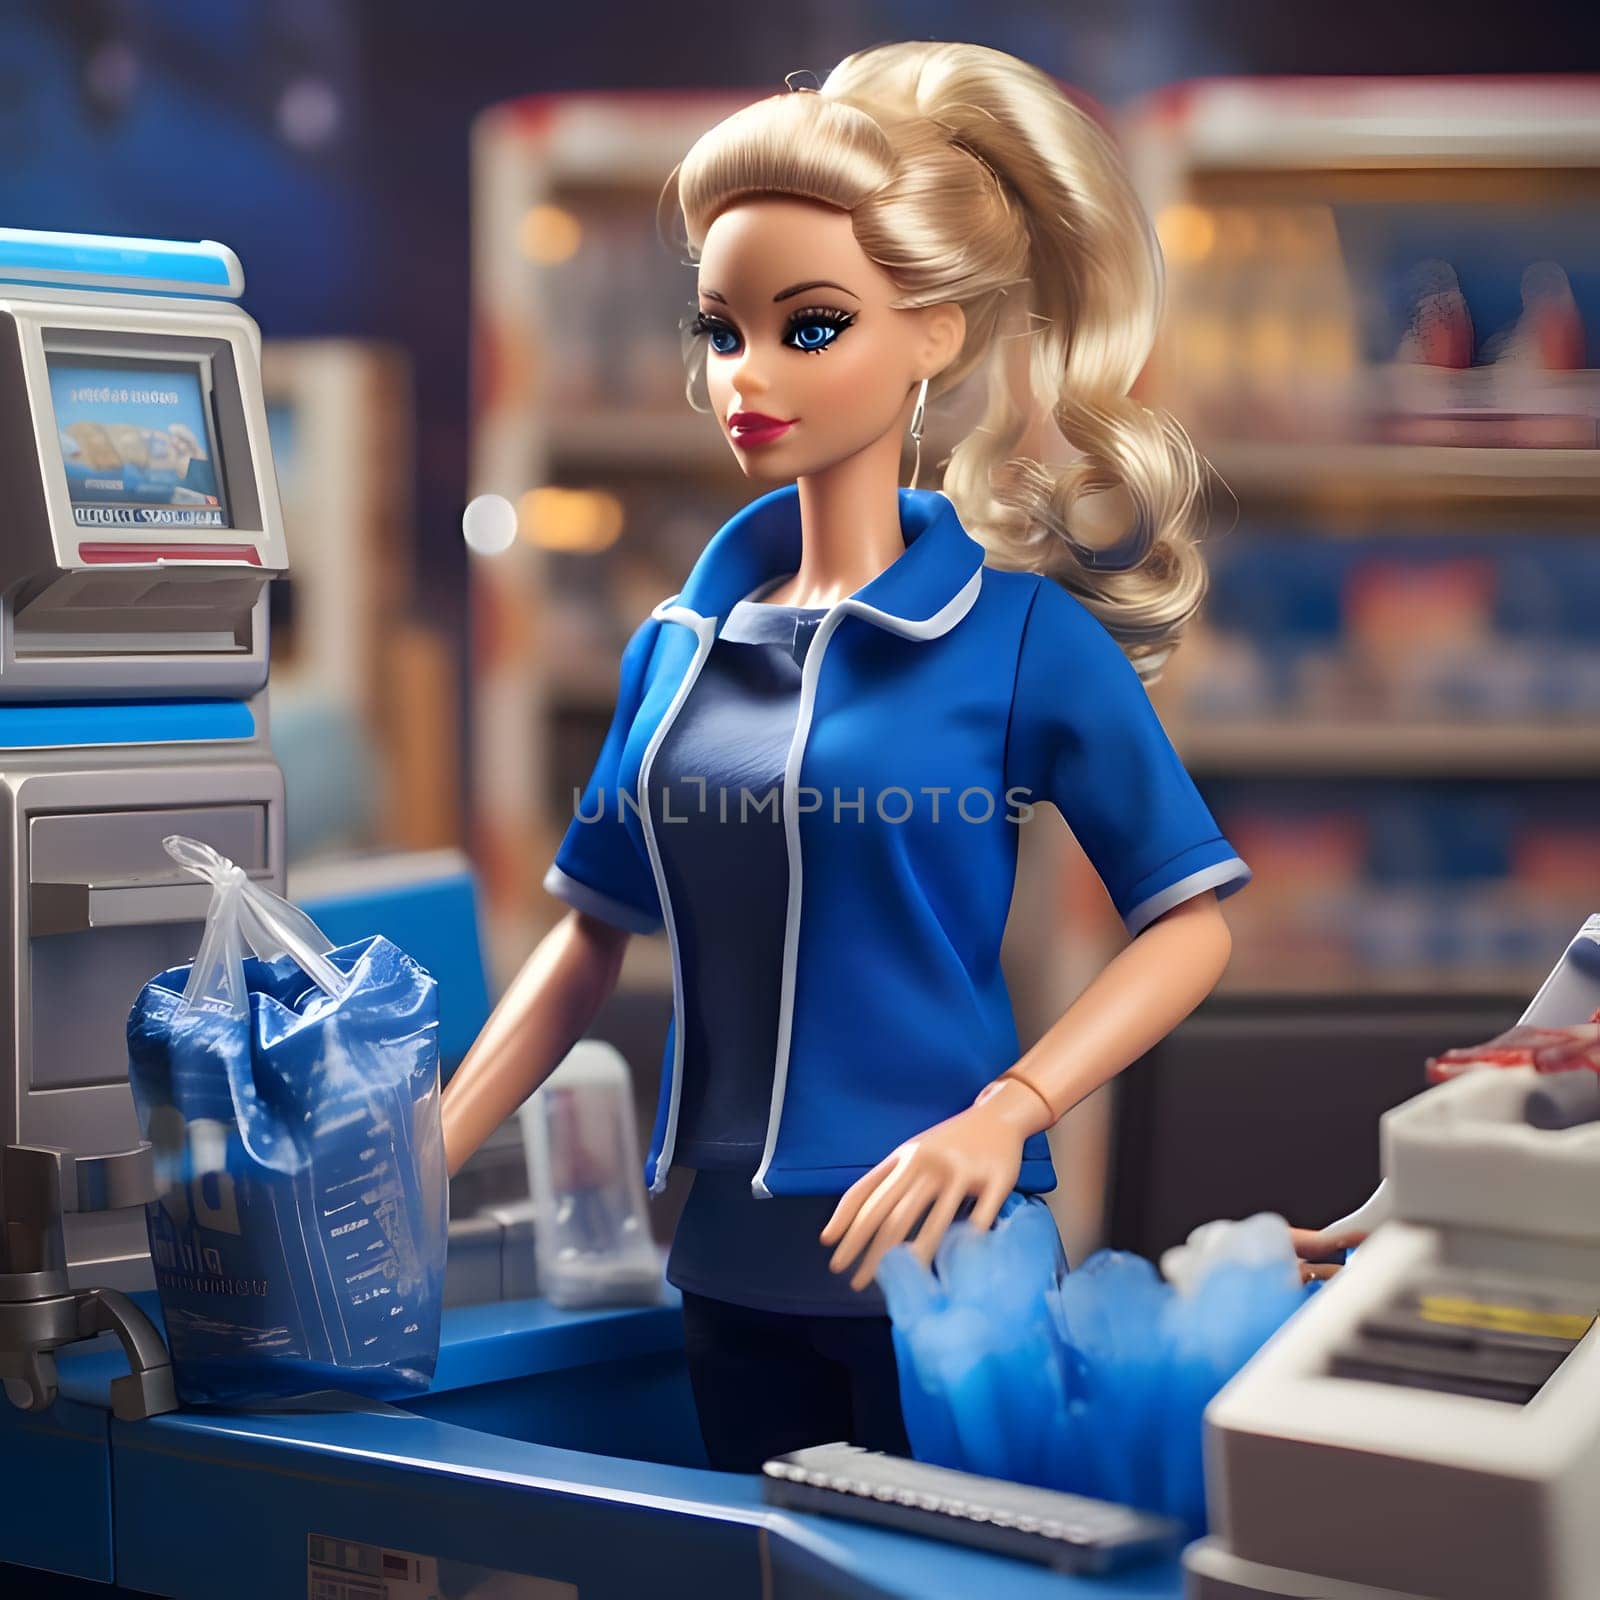 Blonde-haired Barbie with a stylish ponytail is busy working in a vibrant market, surrounded by fresh produce and colorful stalls.